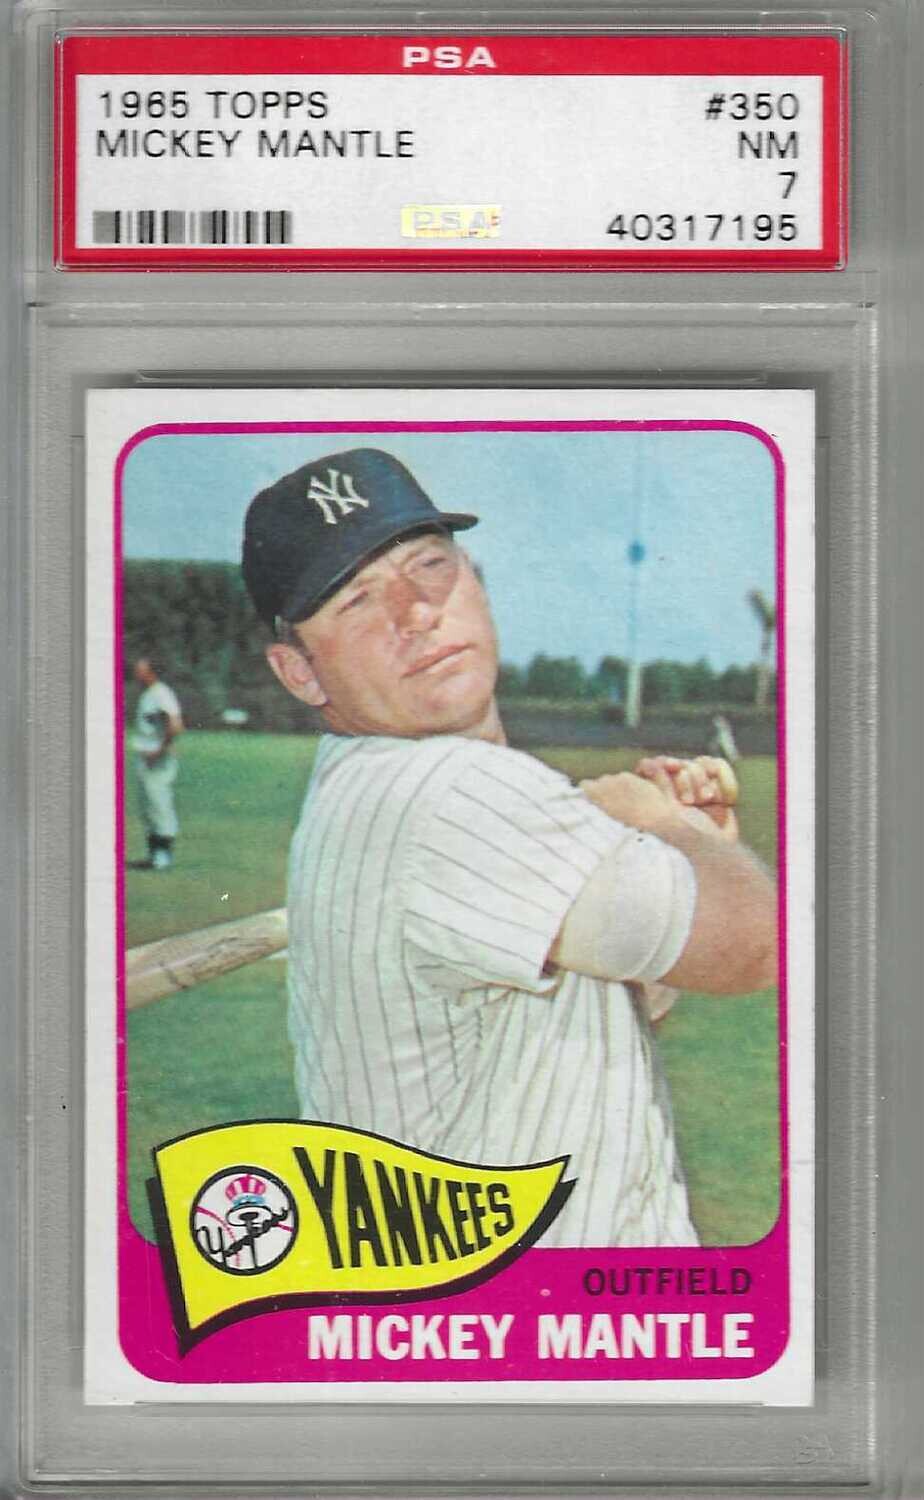 1965 Topps #350 Mickey Mantle PSA 7 Centered